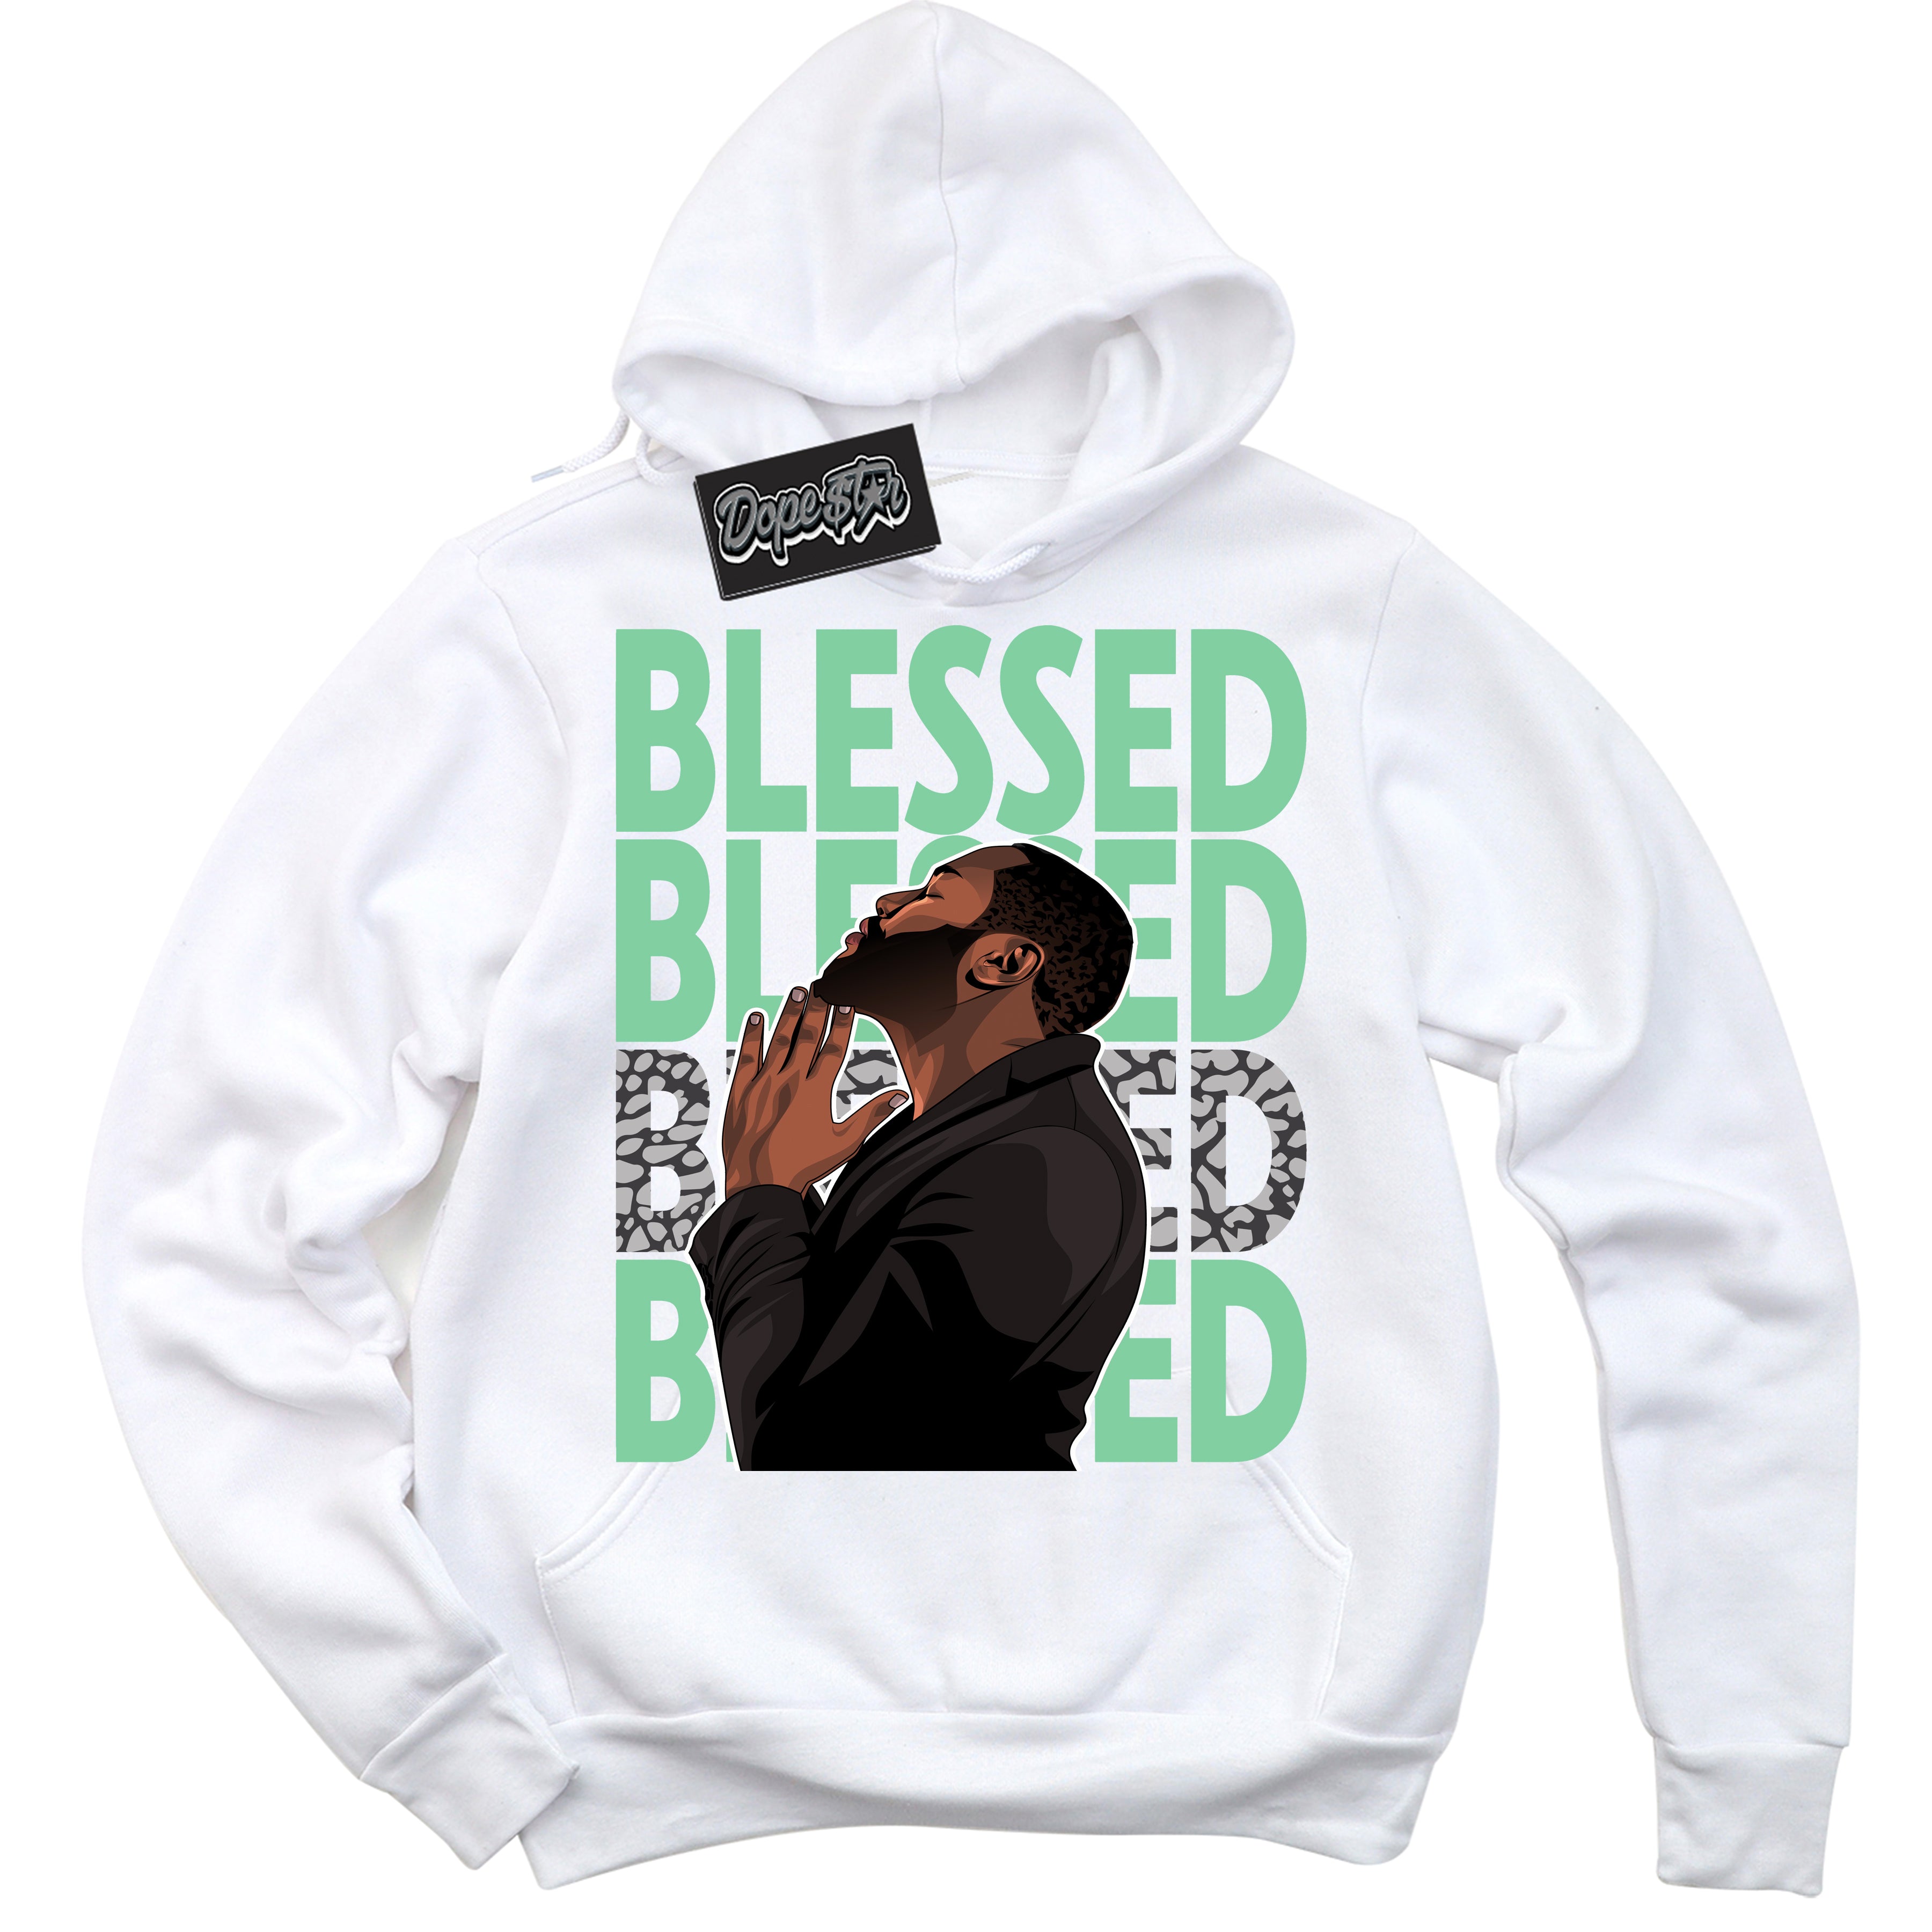 Cool White Graphic DopeStar Hoodie with “ God Blessed “ print, that perfectly matches Green Glow 3s sneakers